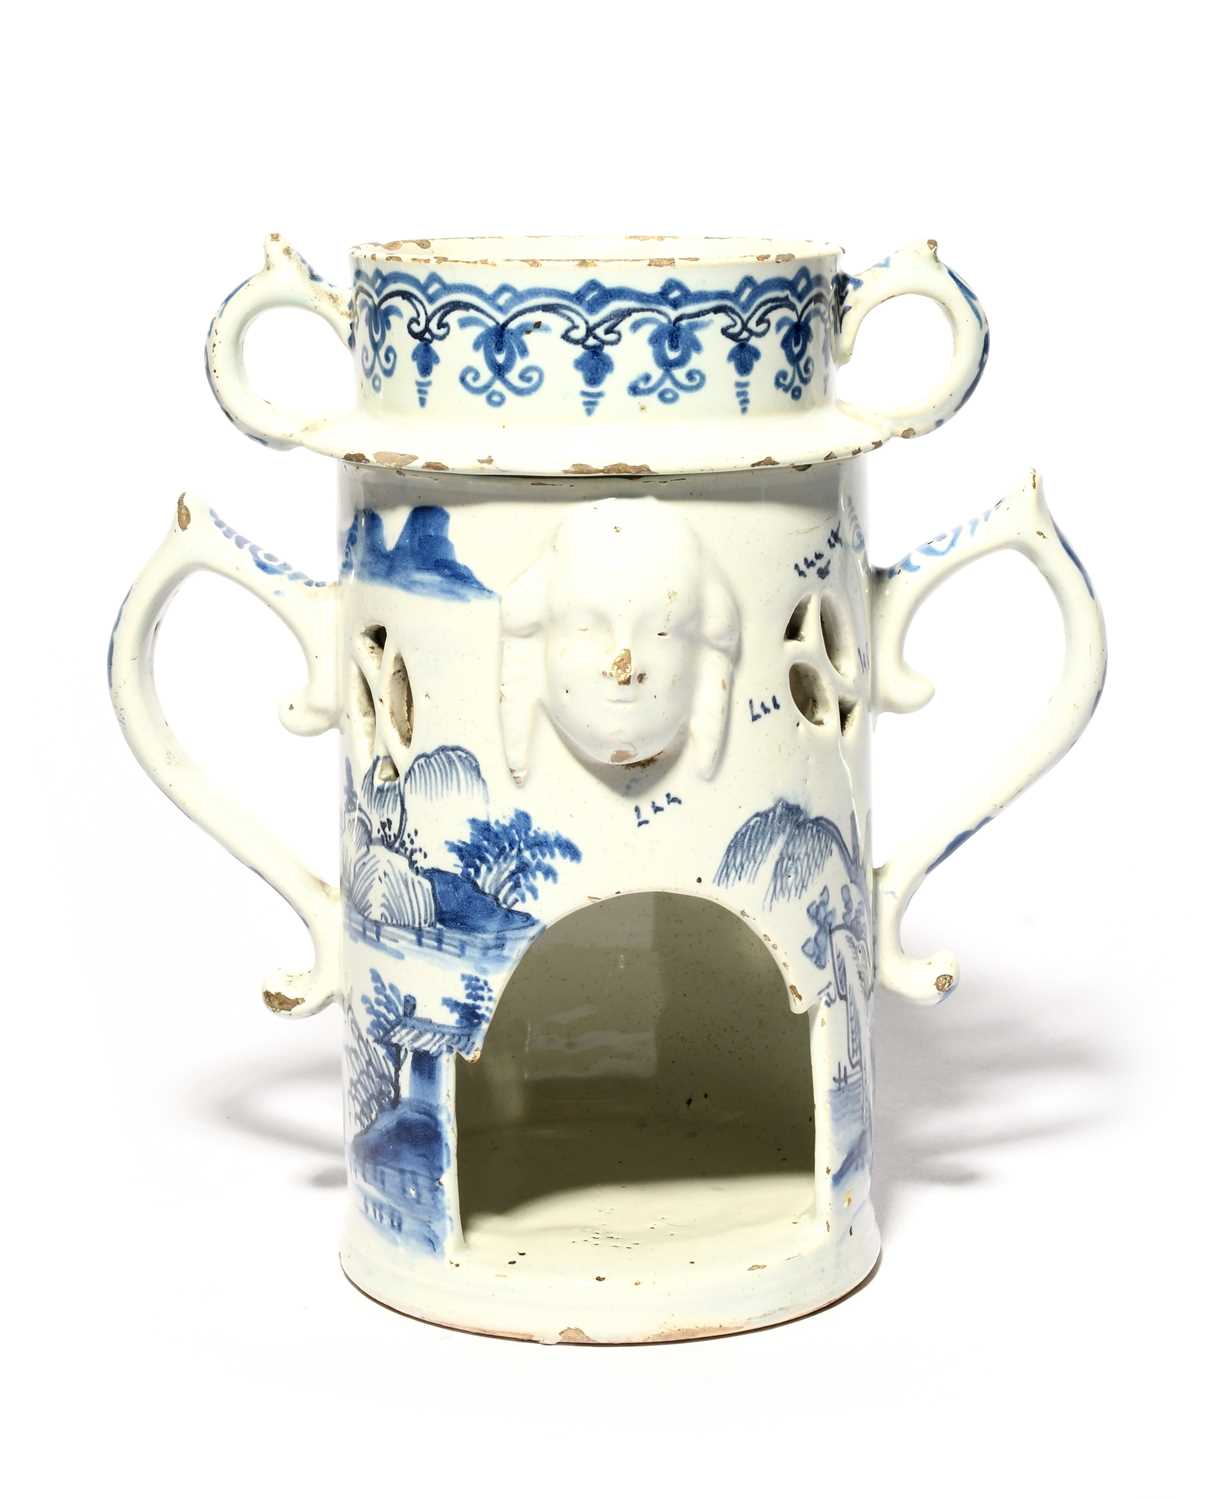 A London delftware part food warmer or veilleuse, c.1765, the cylindrical base painted in blue